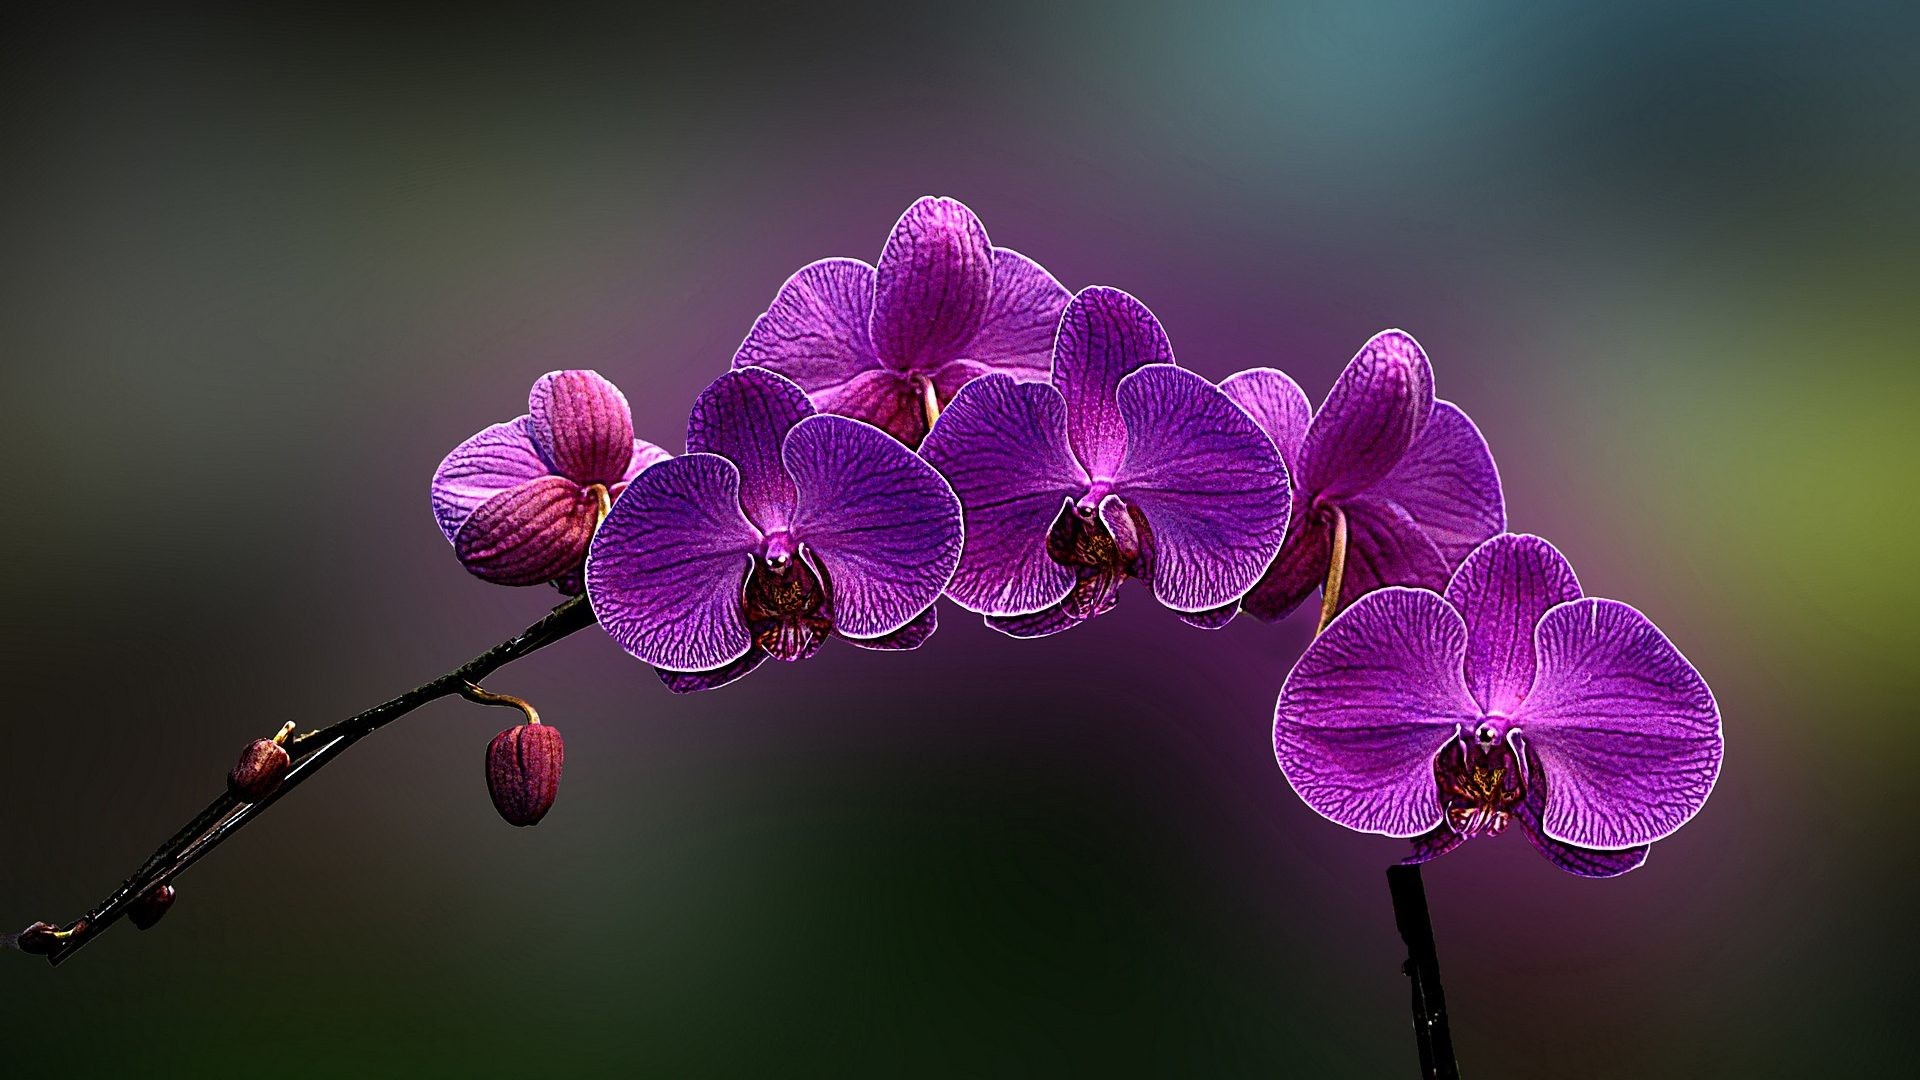 1920x1080 Orchids Tag - Flowers Orchids Purple Nature Screensavers For Desktop Free  Download for HD 16: